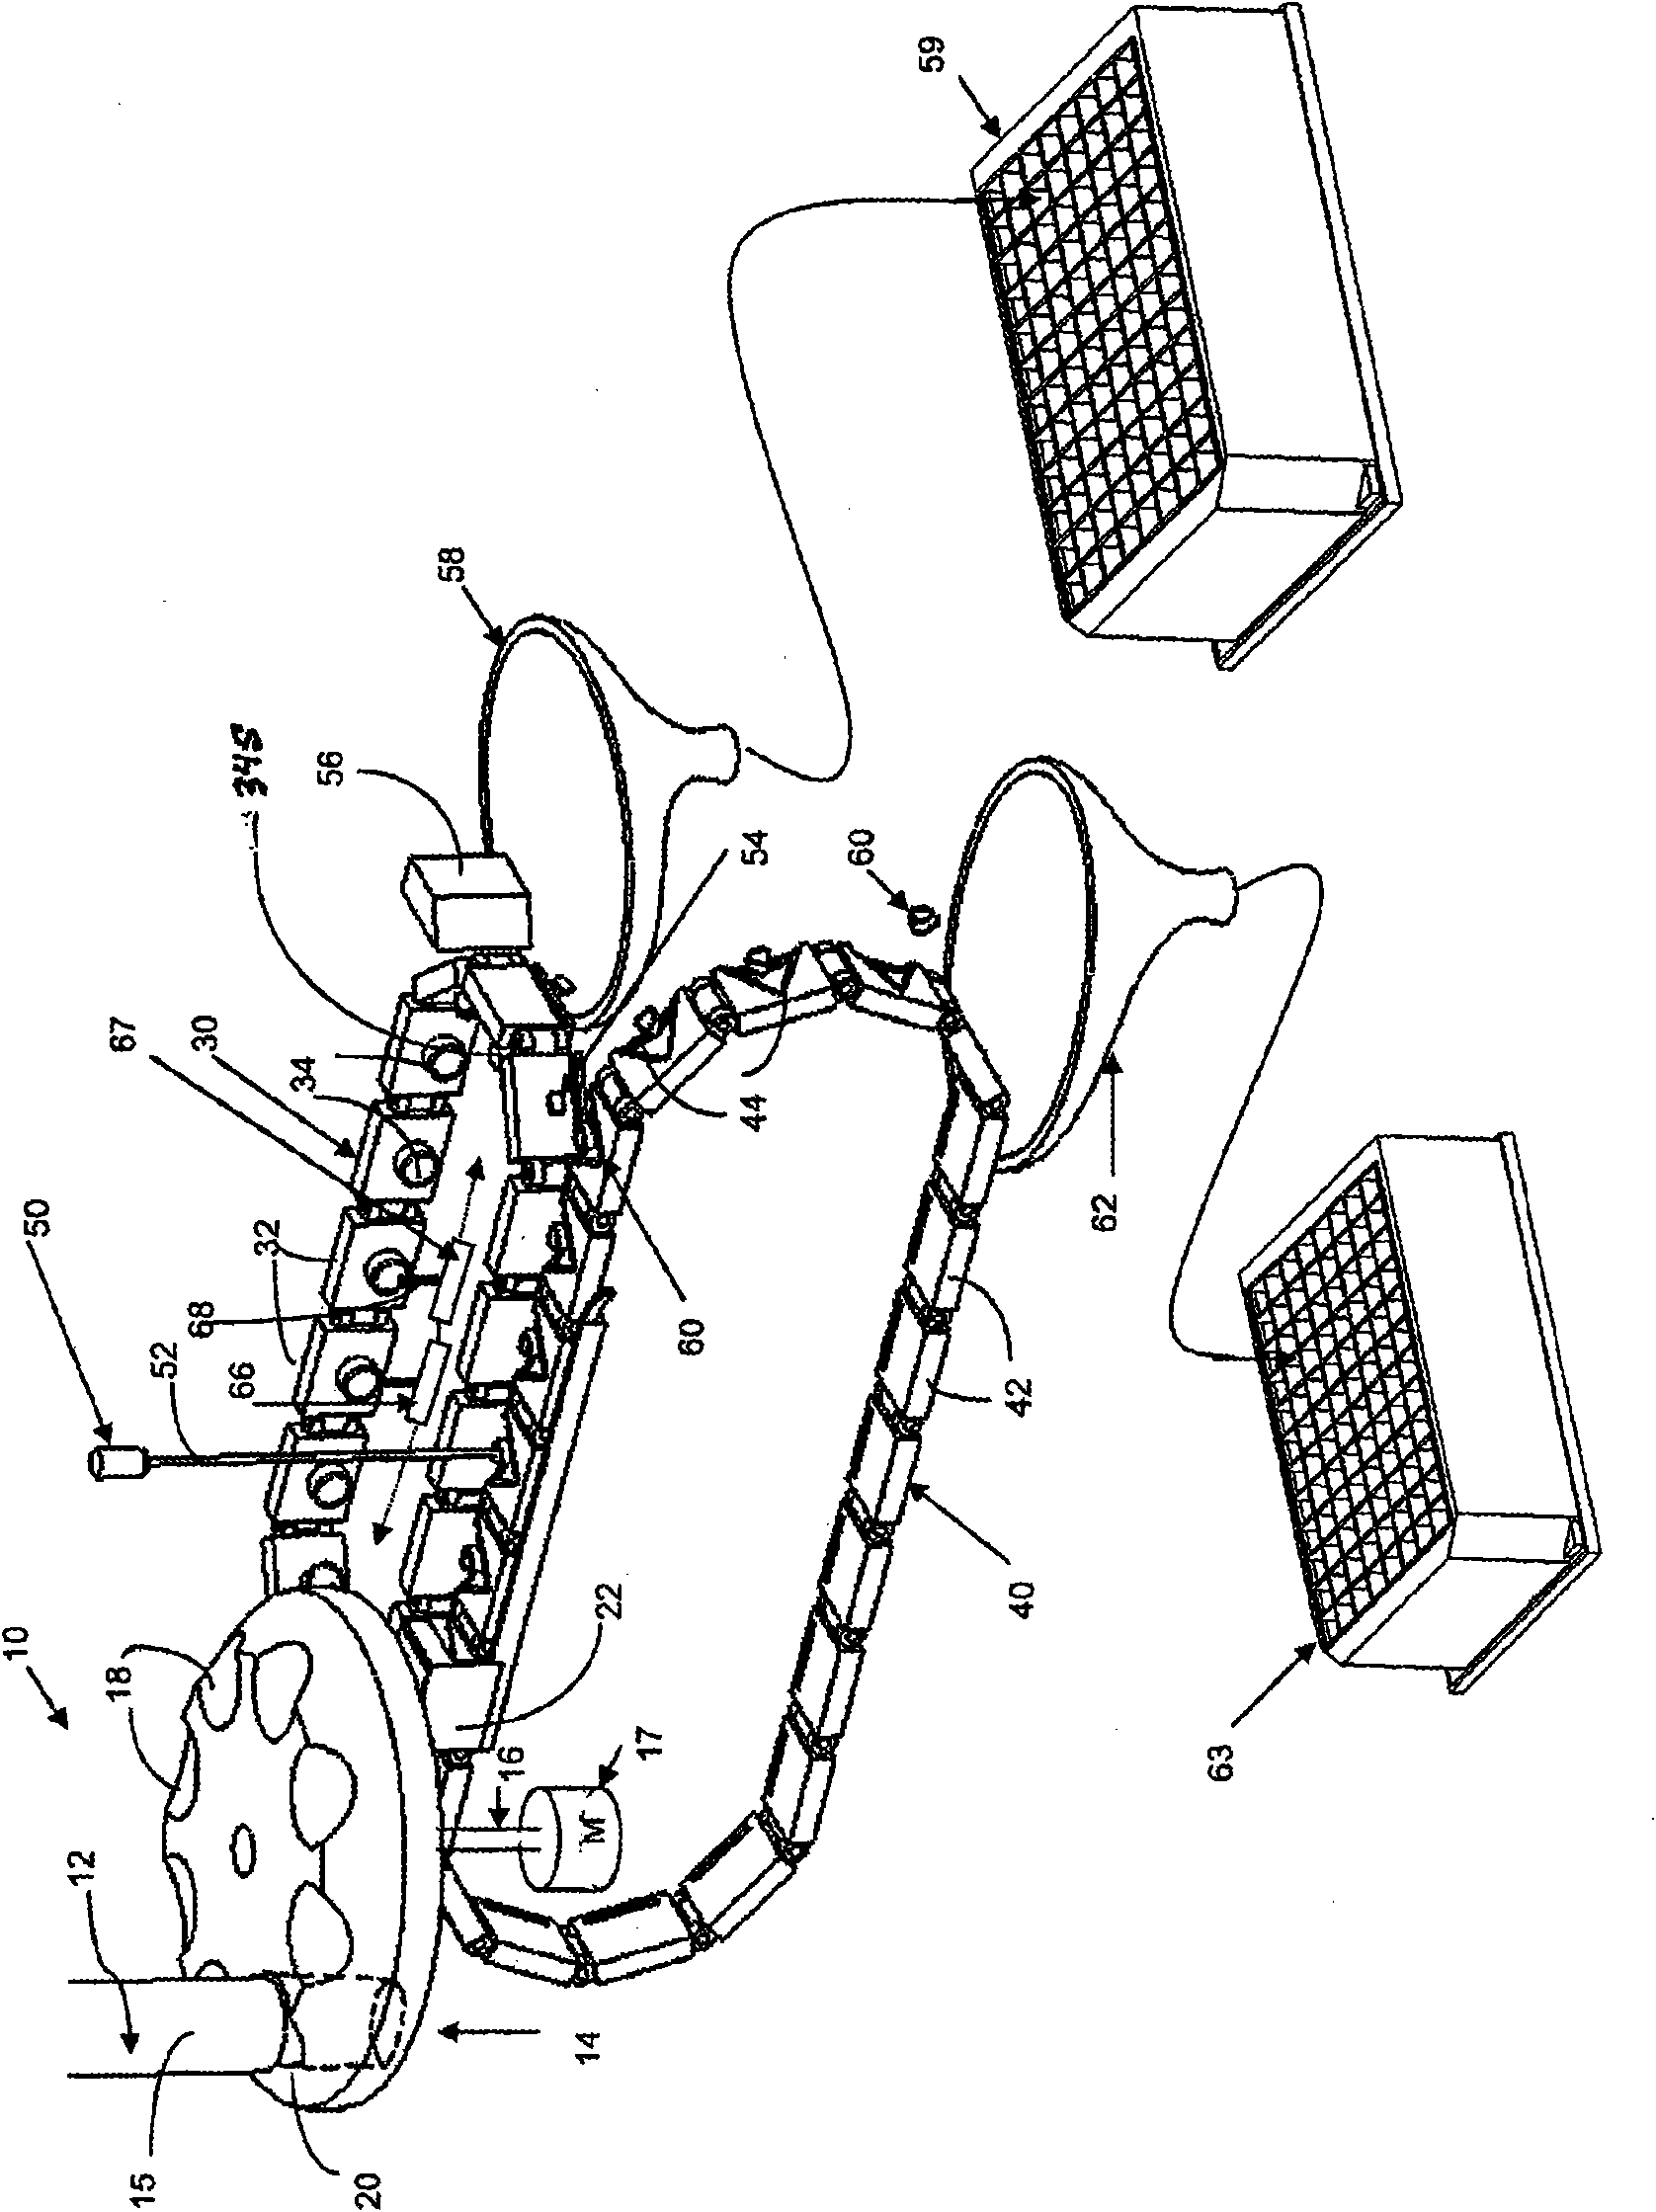 Method and processe for orientating, sampling and collecting seed tissues from individual seed